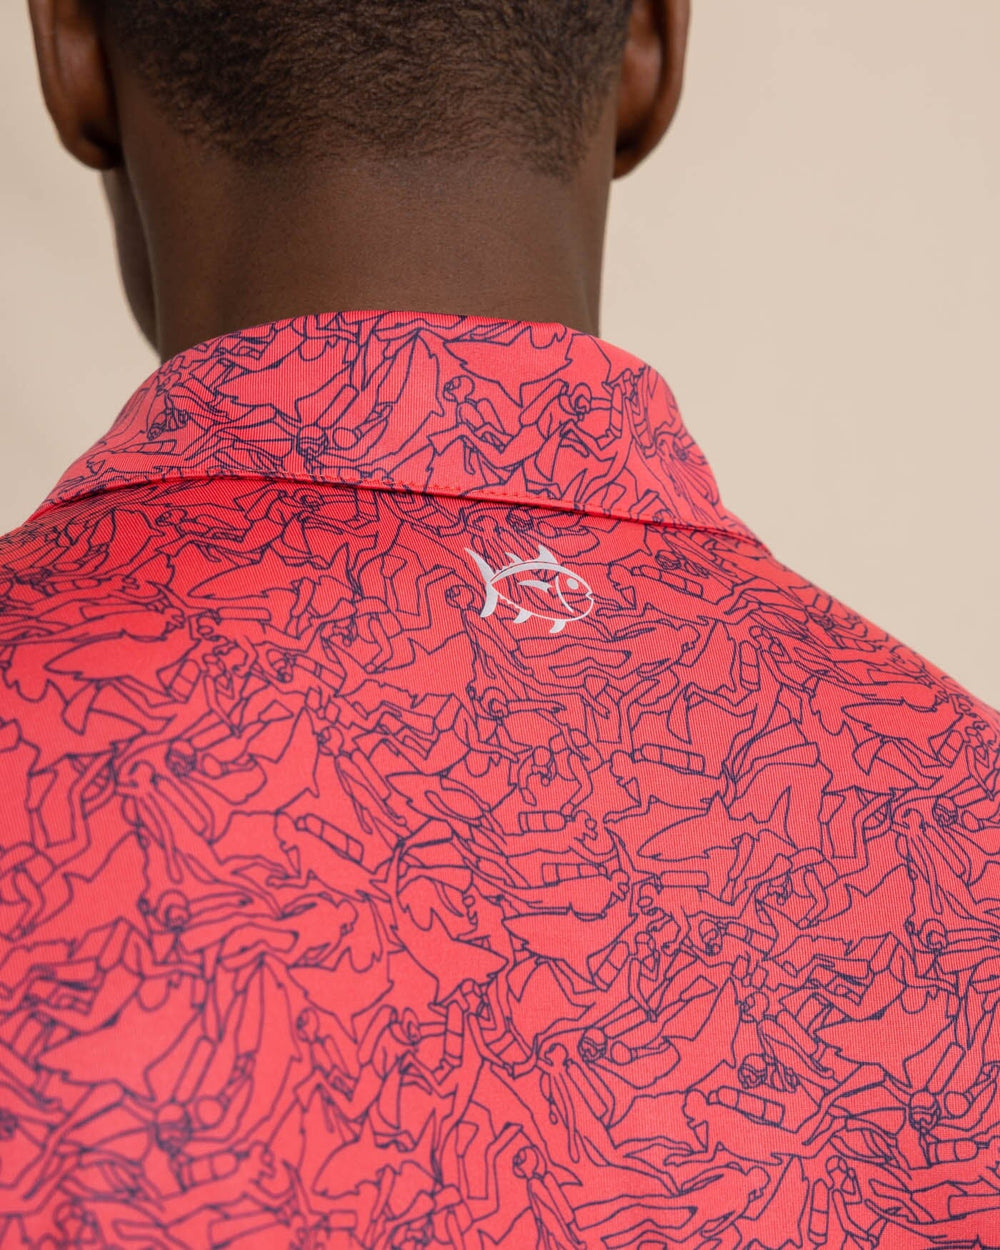 The detail view of the Southern Tide Driver Dive In Polo Shirt by Southern Tide - Teaberry Pink